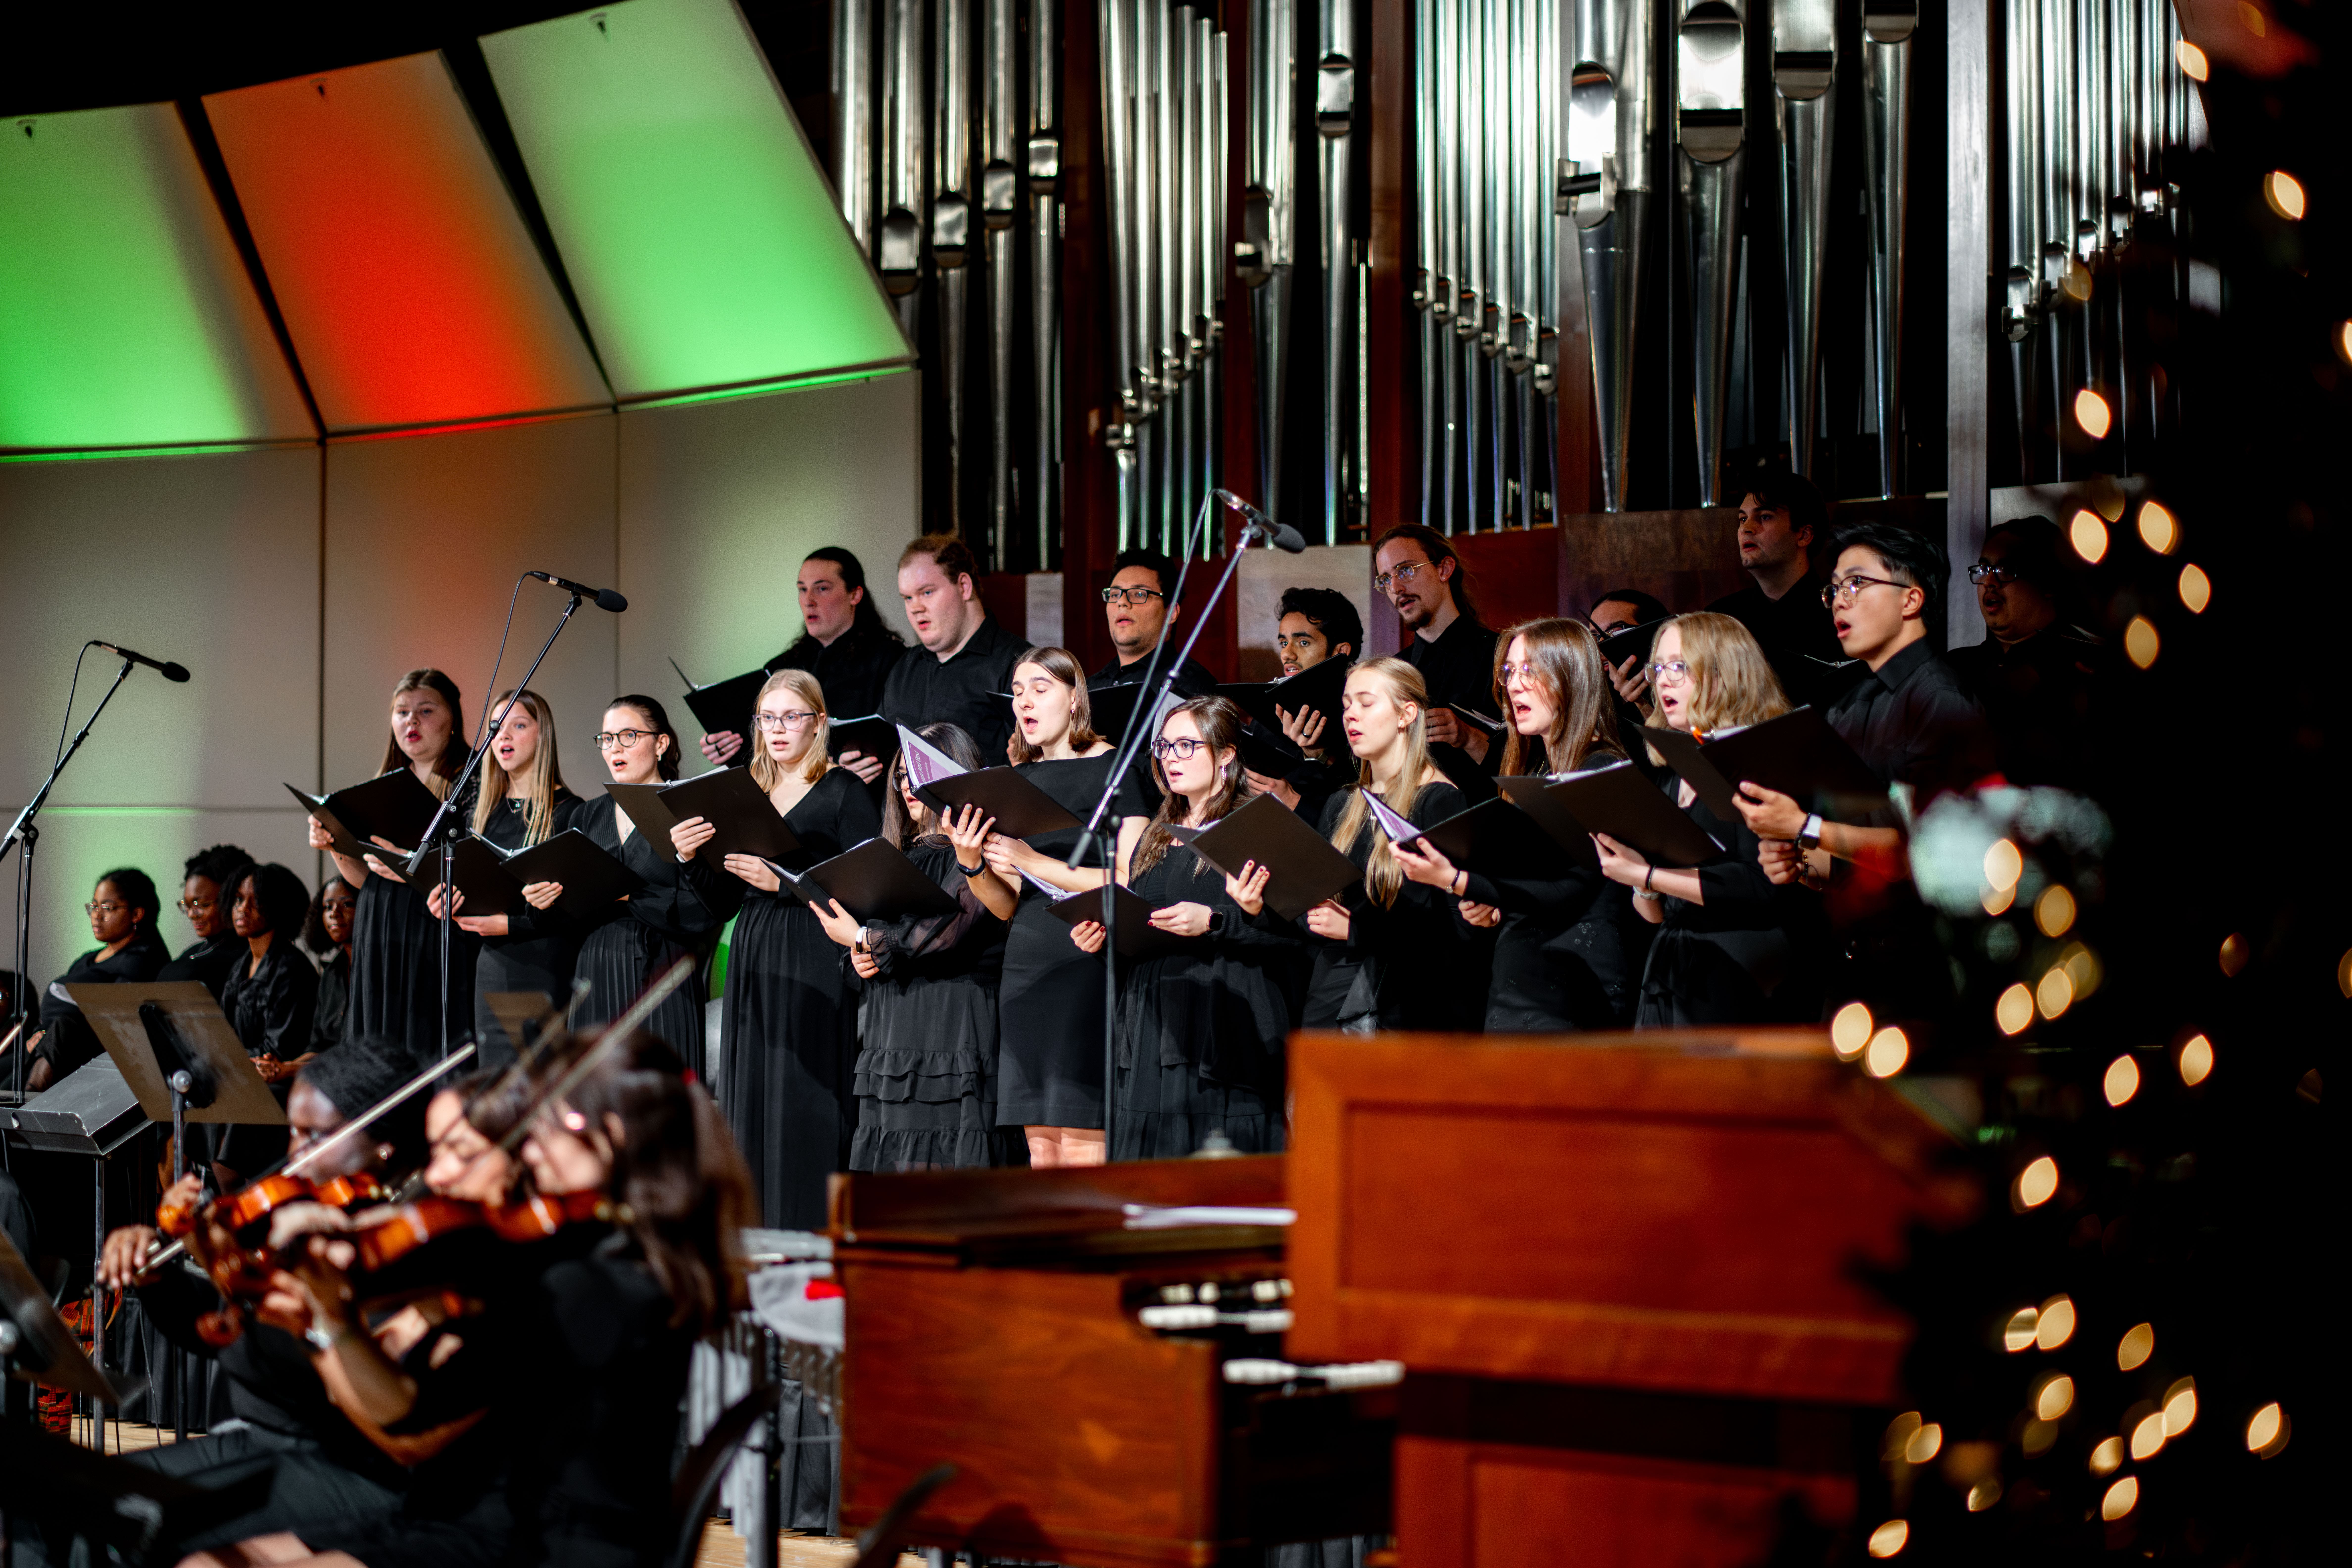 On December 2nd, the music department at Trinity Christian College welcomed the community to its annual Christmastide program in the Ozinga Chapel.